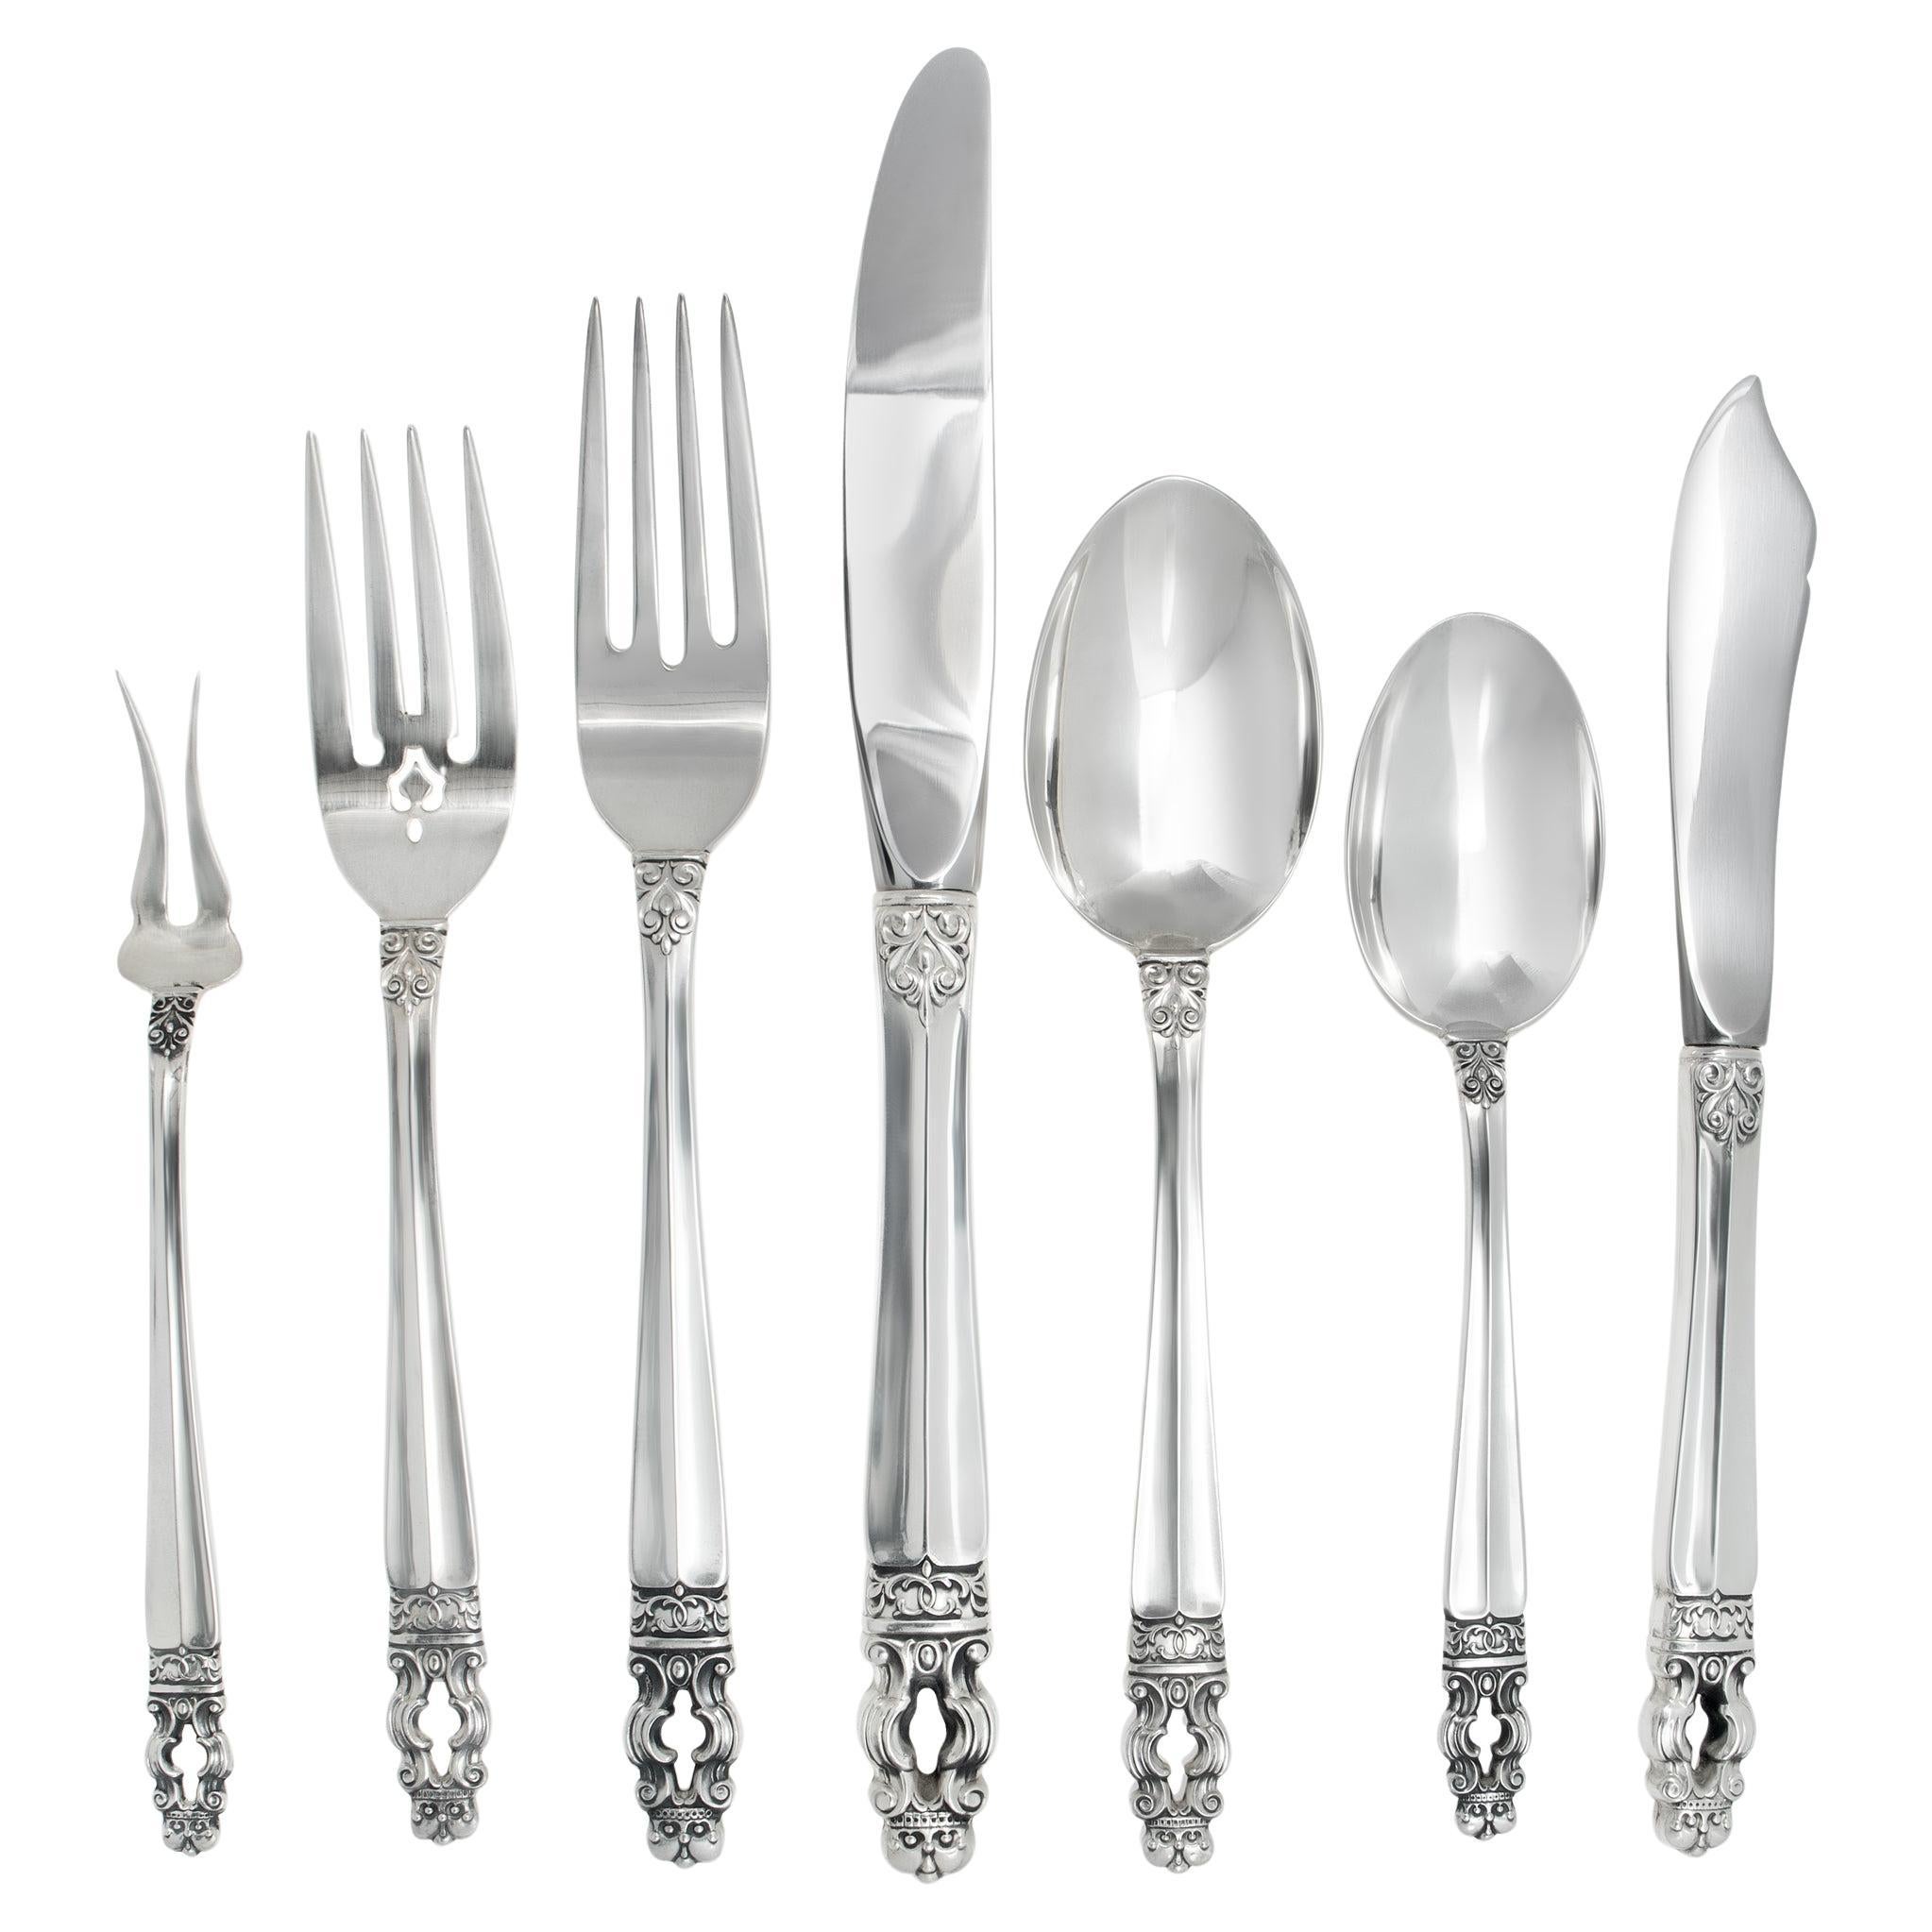 SOVEREIGN HISPANIA 5 Place setting for 8 w/ 5 serving pieces. 45 Pieces total For Sale